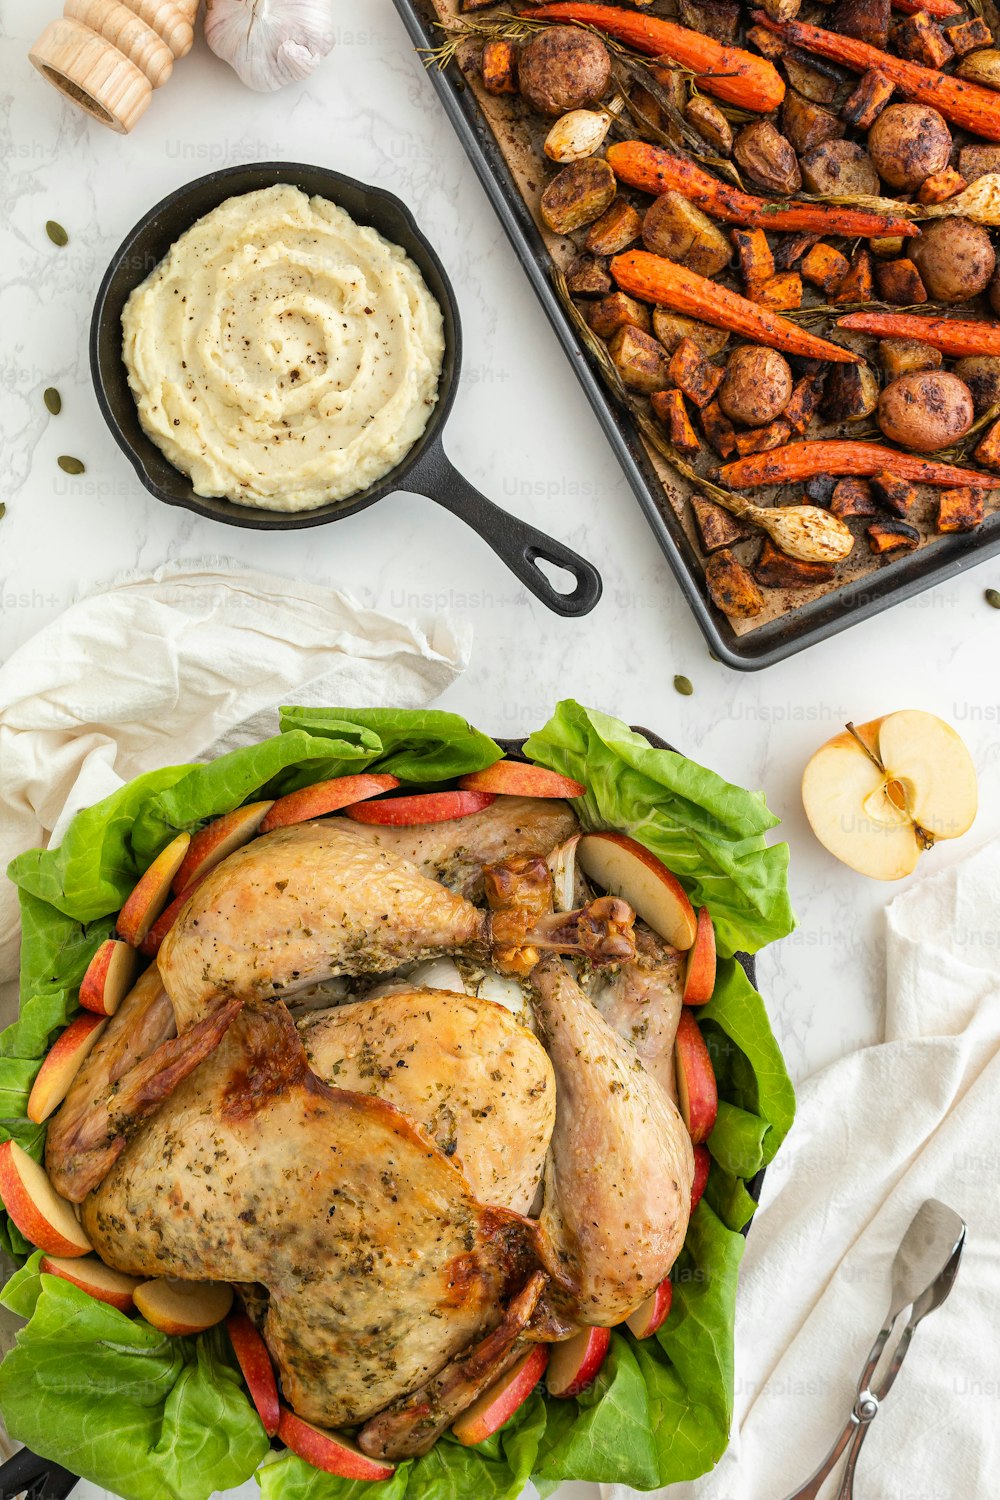 a roasted chicken and vegetables on a bed of lettuce